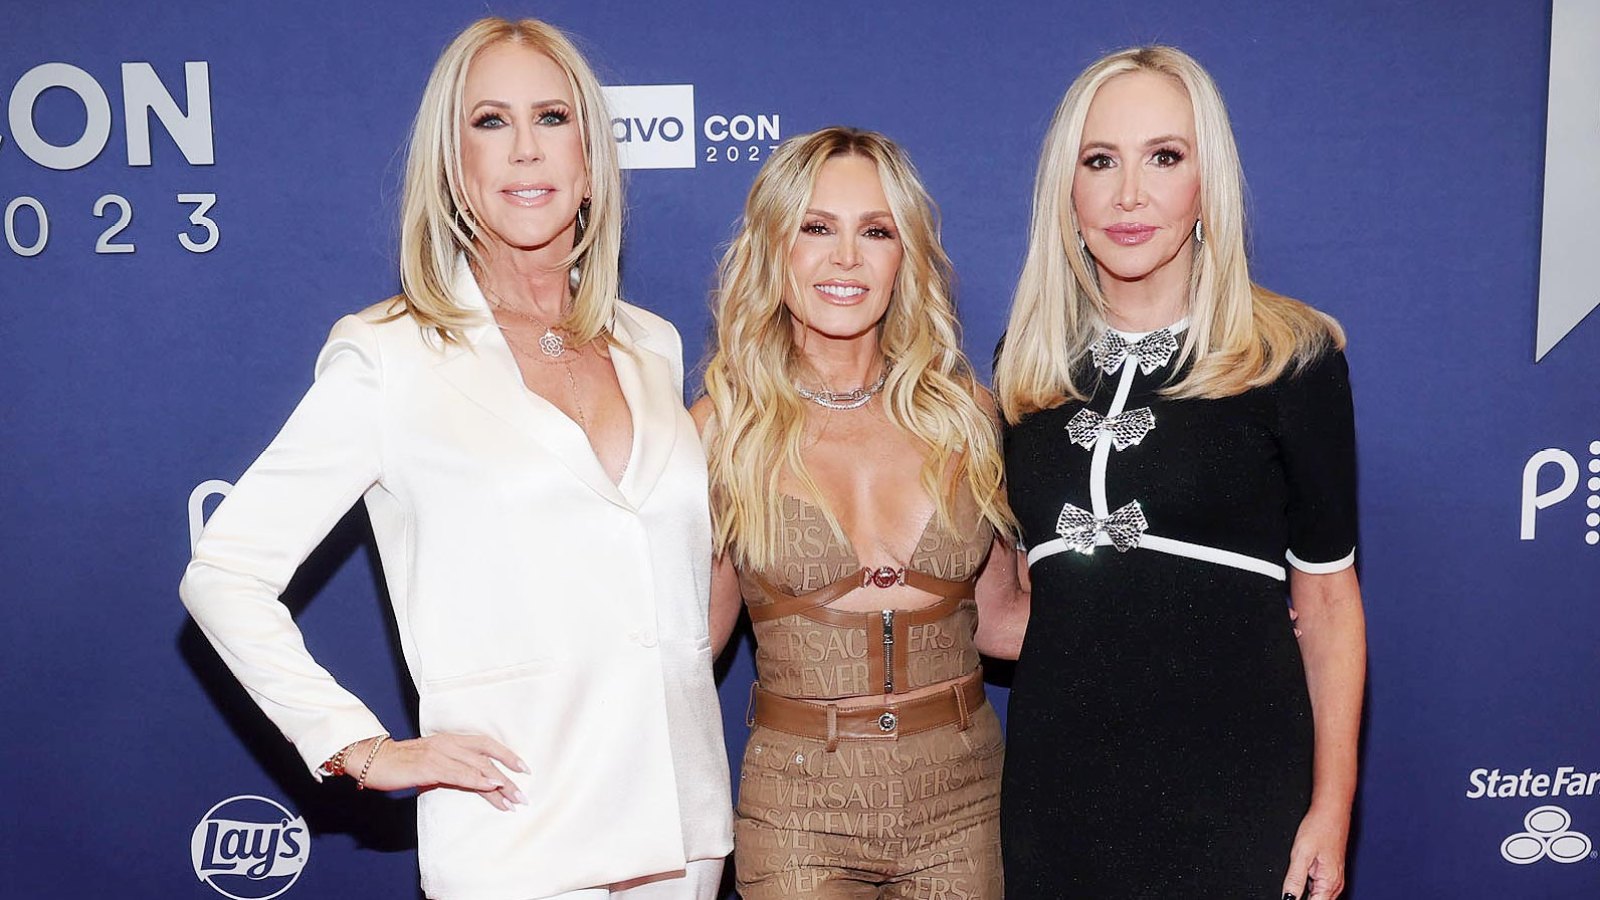 RHOCs Tamra Judge Says Fallout With Vicki Gunvalson and Shannon Beador Is So Twisted